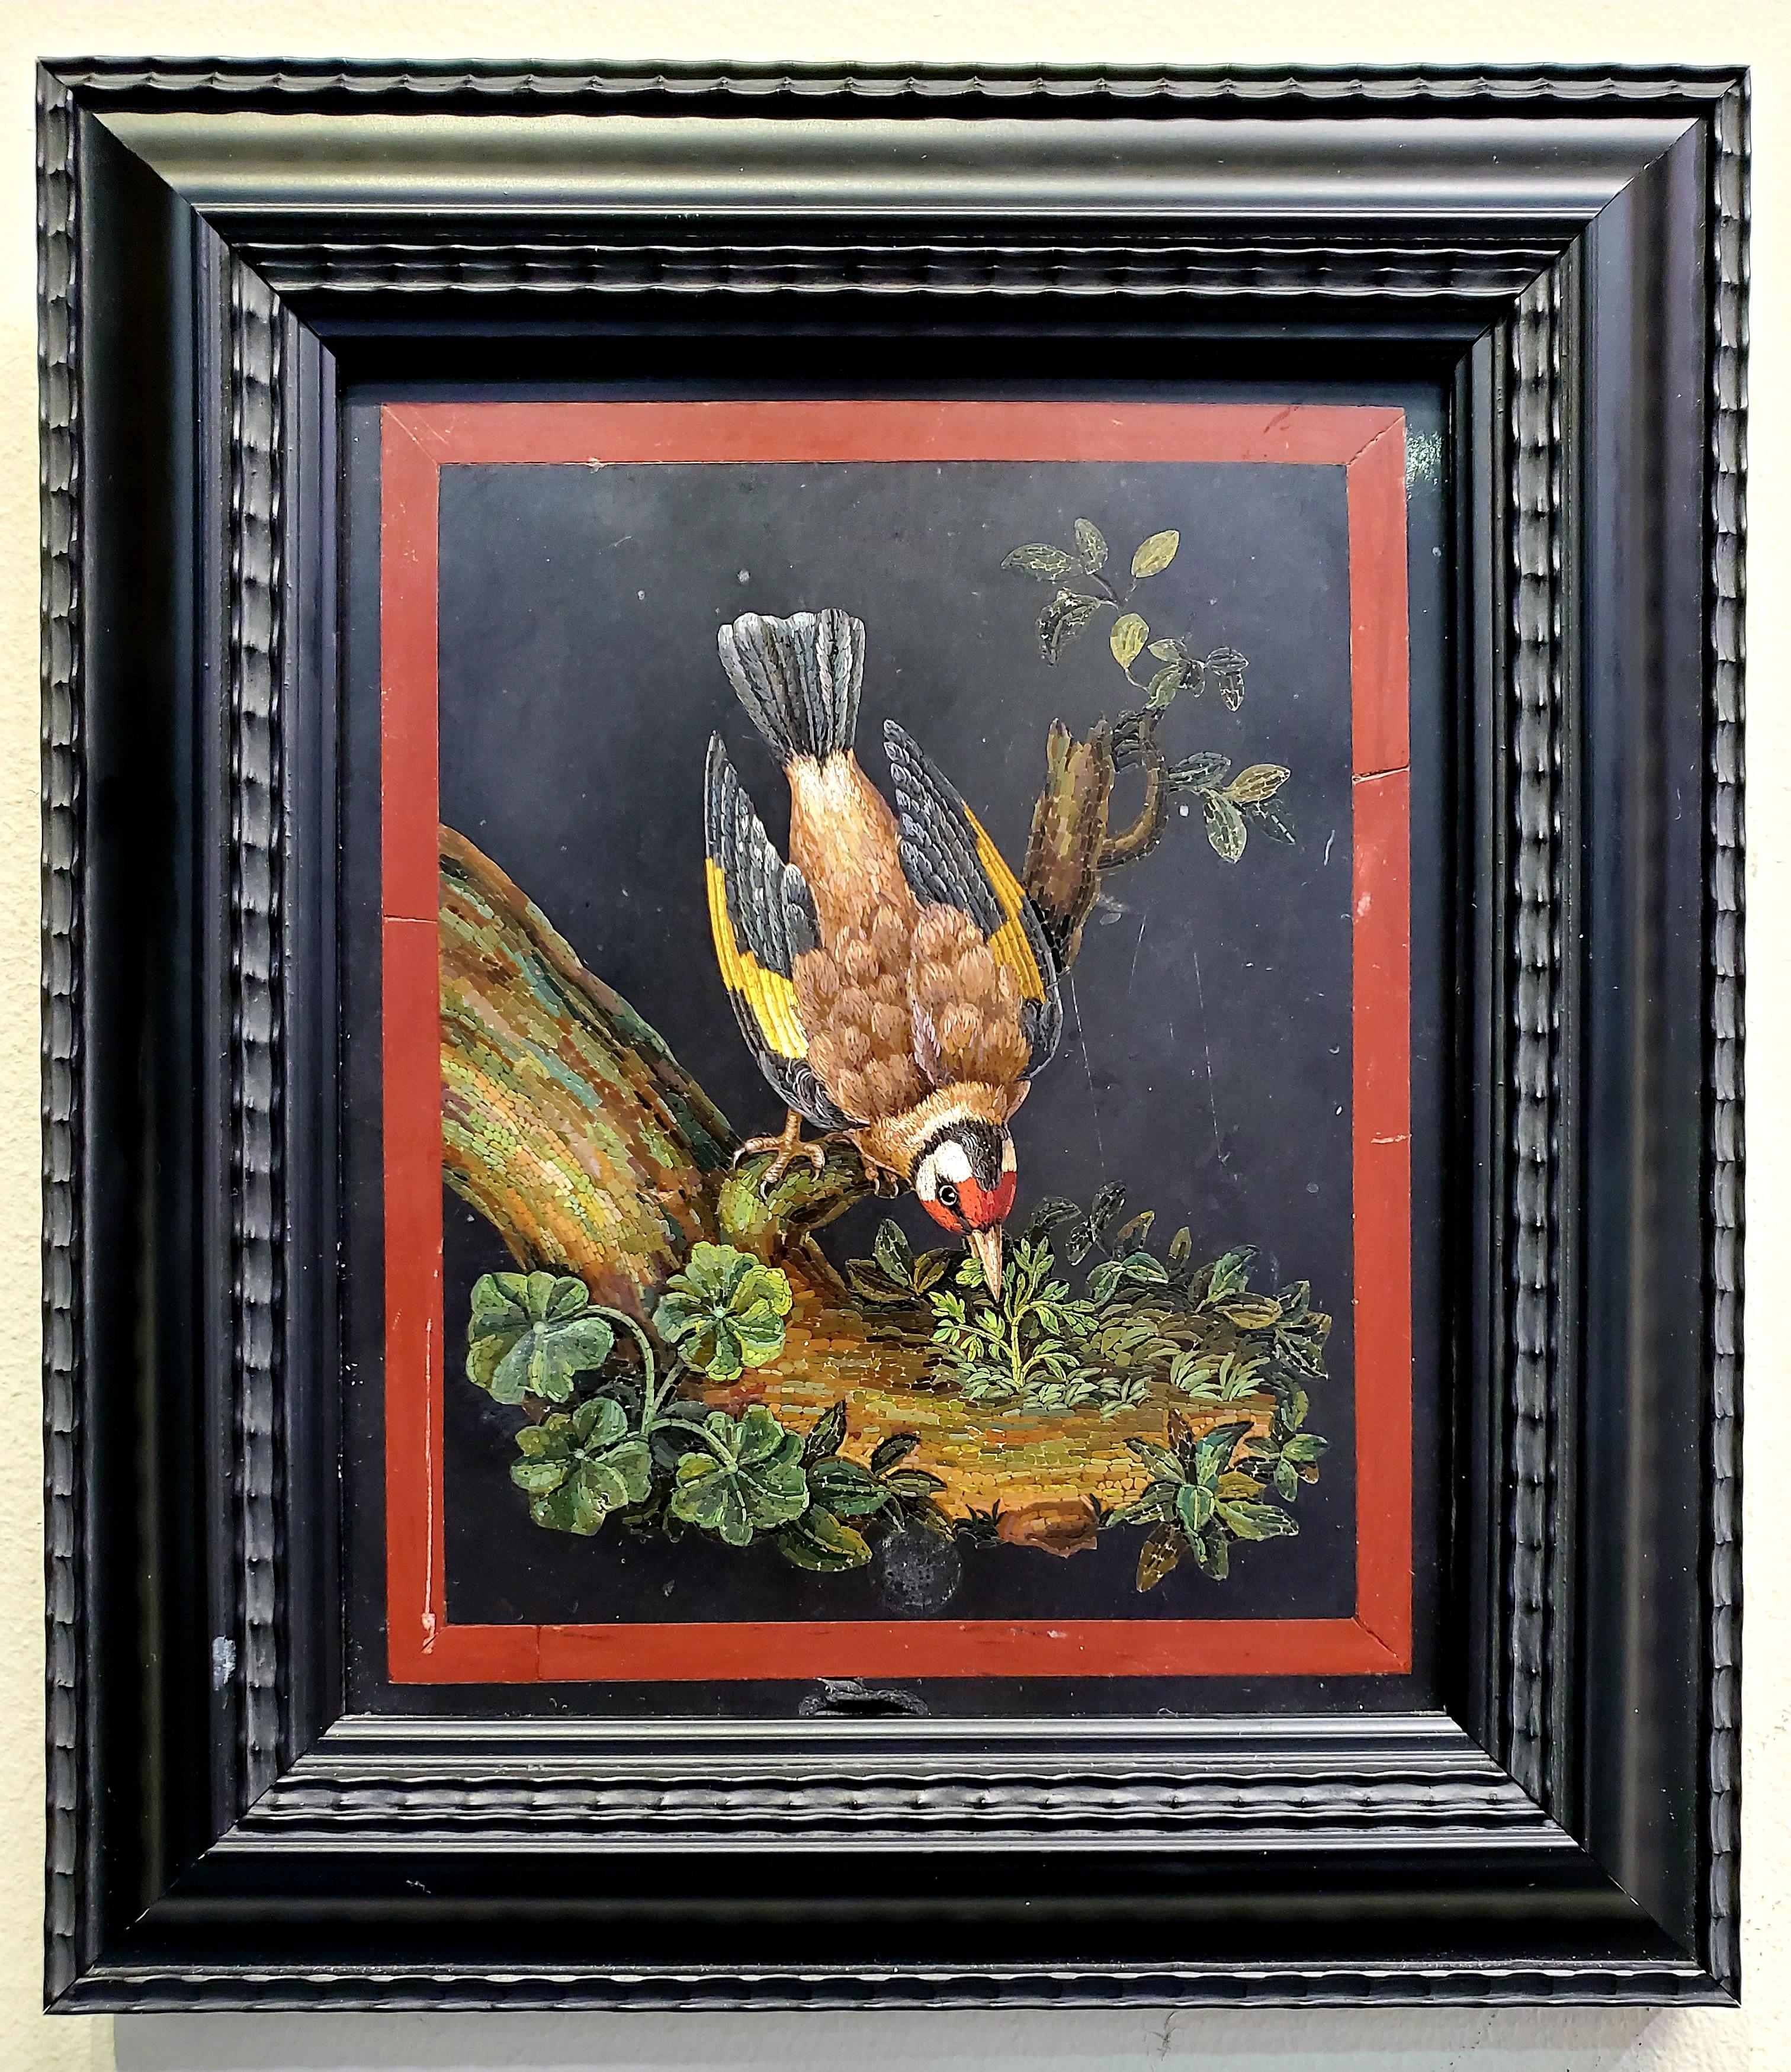 Very rare 18th century micromosaic depicting a goldfinch bird.


Measurements: 
Without frame approximately 5.5 in x 6.5 inches
With frame approximately 8.44 x 9.63 inches.